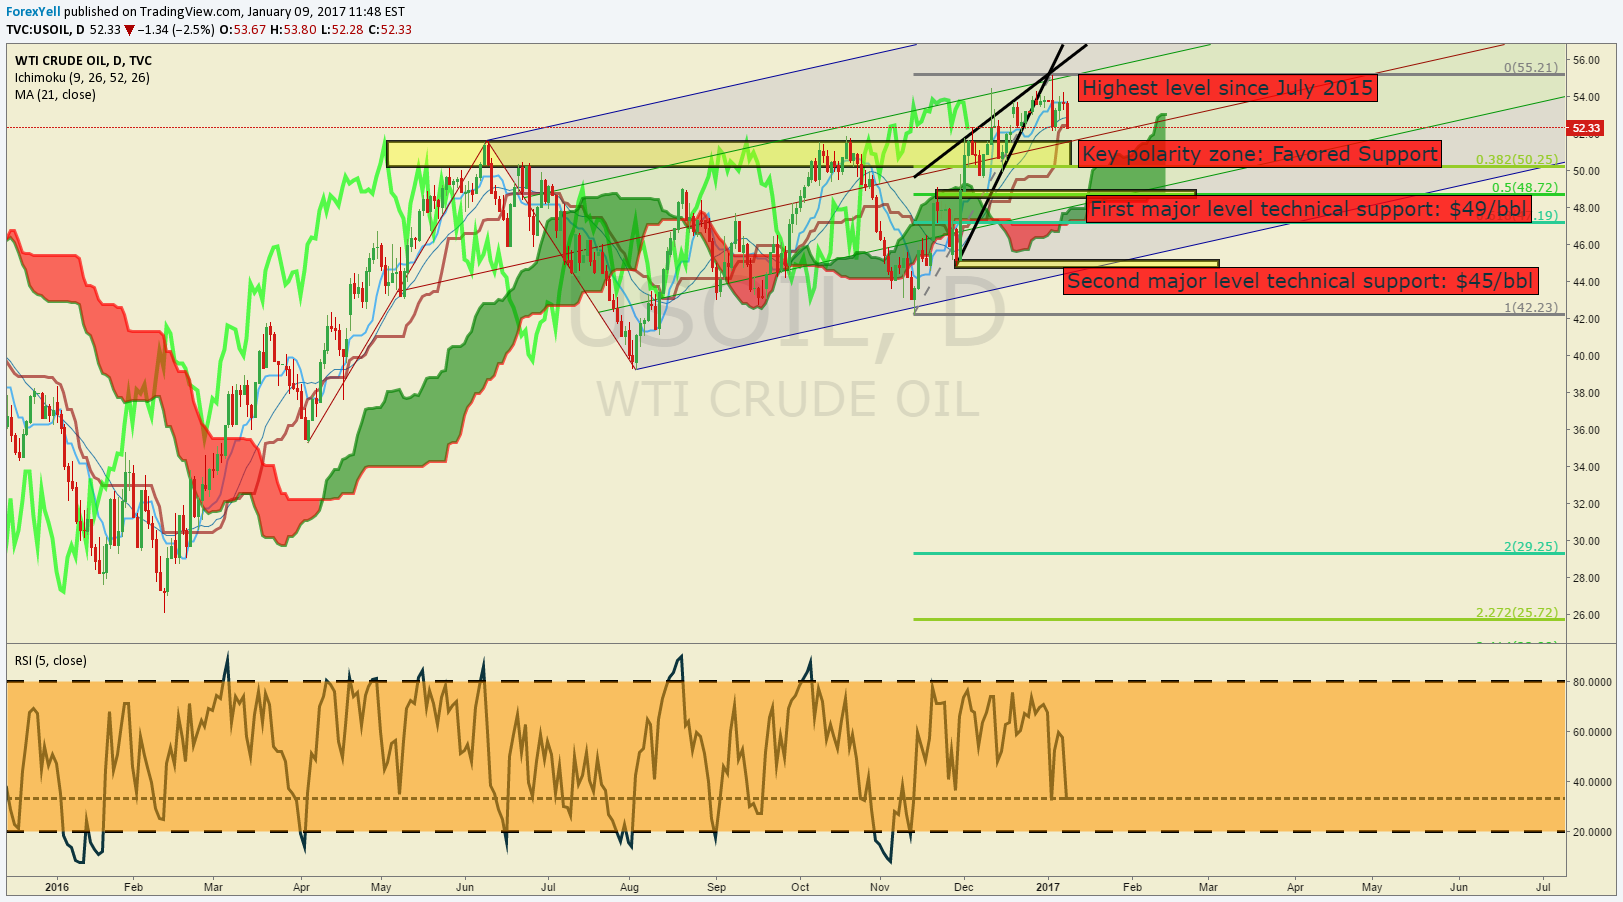 Crude Oil Price Forecast Evening Star Pattern Turns St Focus Lower - 